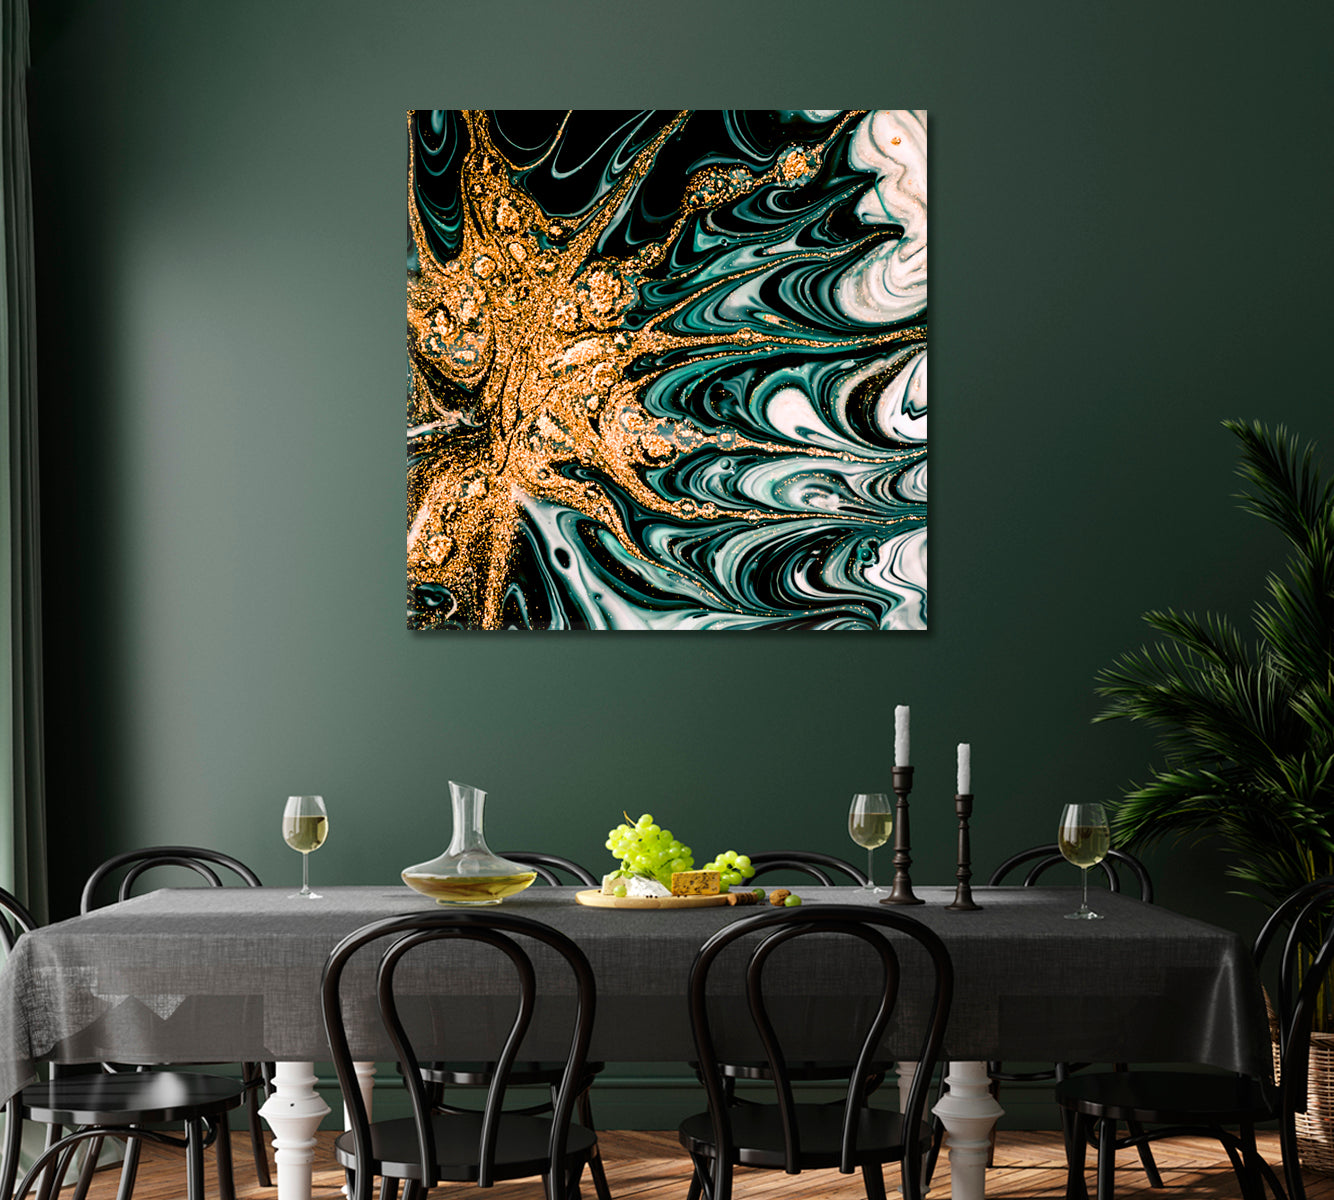 Abstract Green Marble Curls Canvas Print-Canvas Print-CetArt-1 panel-12x12 inches-CetArt